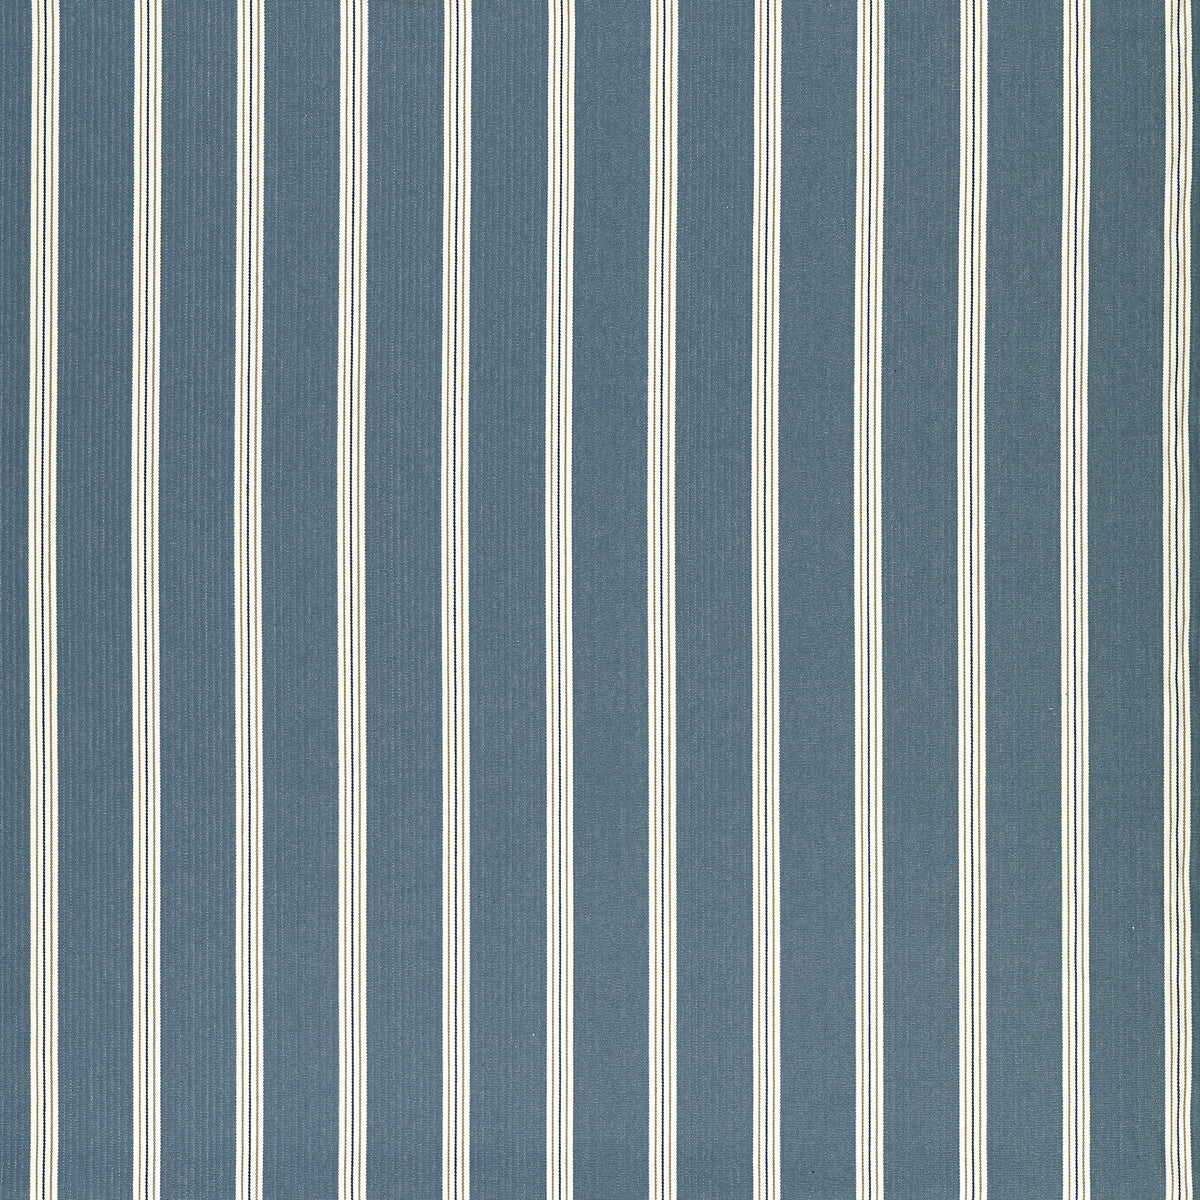 Knightsbridge fabric in denim color - pattern F1500/01.CAC.0 - by Clarke And Clarke in the Clarke &amp; Clarke Edgeworth collection